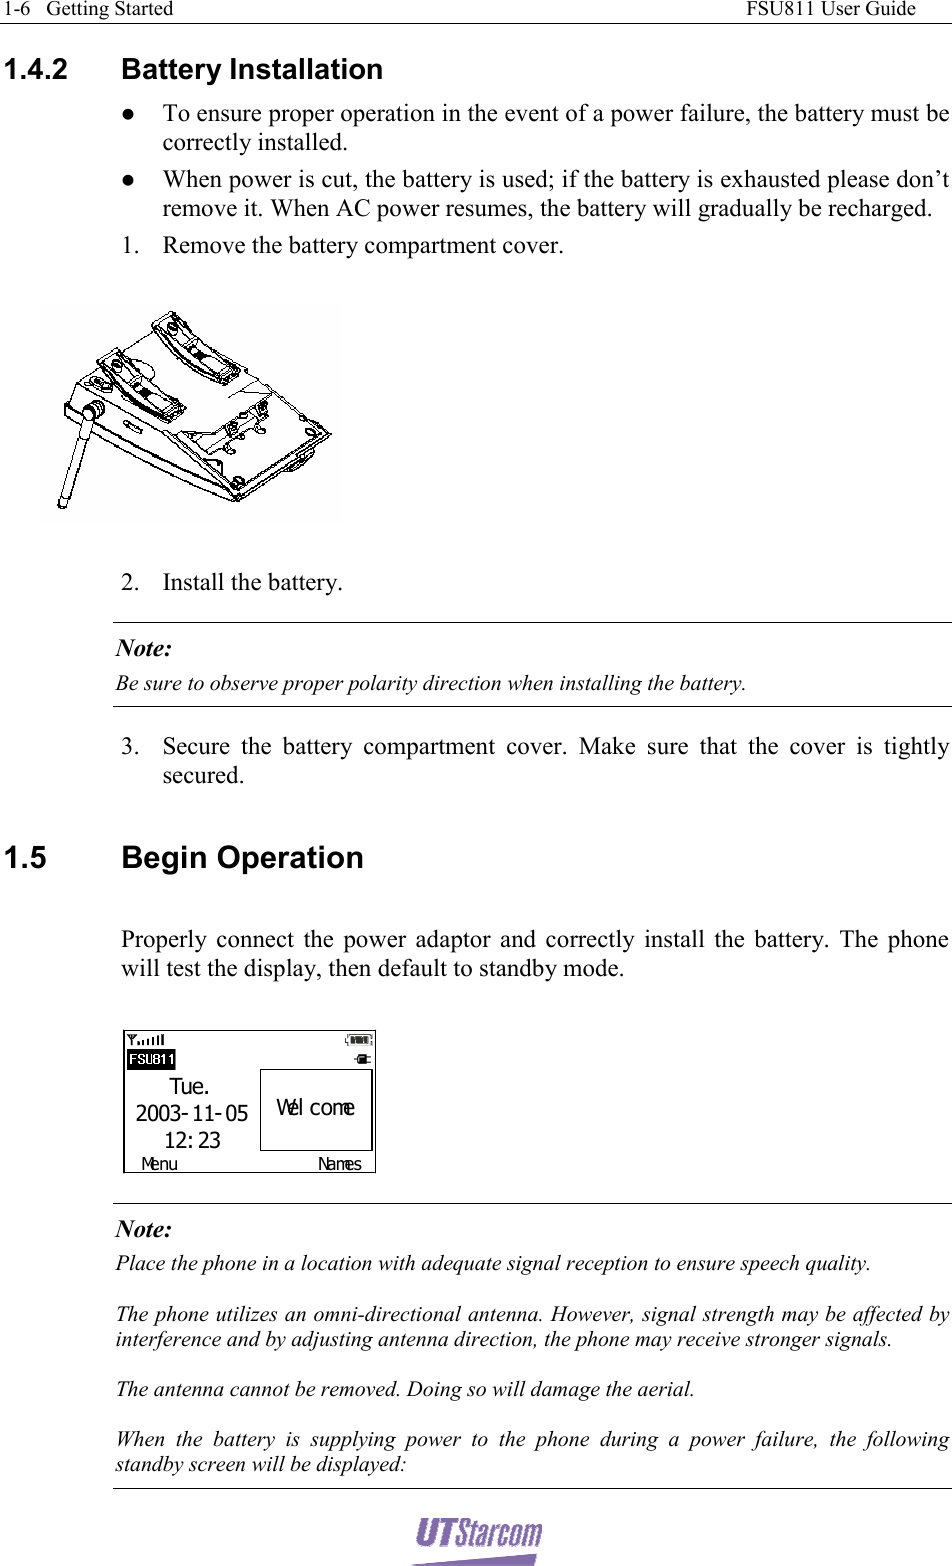 1-6   Getting Started                                                                                                              FSU811 User Guide  1.4.2  Battery Installation  z To ensure proper operation in the event of a power failure, the battery must be correctly installed. z When power is cut, the battery is used; if the battery is exhausted please don’t remove it. When AC power resumes, the battery will gradually be recharged. 1. Remove the battery compartment cover.    2. Install the battery. Note:  Be sure to observe proper polarity direction when installing the battery. 3. Secure the battery compartment cover. Make sure that the cover is tightly secured.  1.5 Begin Operation  Properly connect the power adaptor and correctly install the battery. The phone will test the display, then default to standby mode.  Menu NamesTue.2003- 11- 0512: 23Wel come Note: Place the phone in a location with adequate signal reception to ensure speech quality. The phone utilizes an omni-directional antenna. However, signal strength may be affected by interference and by adjusting antenna direction, the phone may receive stronger signals. The antenna cannot be removed. Doing so will damage the aerial. When the battery is supplying power to the phone during a power failure, the following standby screen will be displayed: 